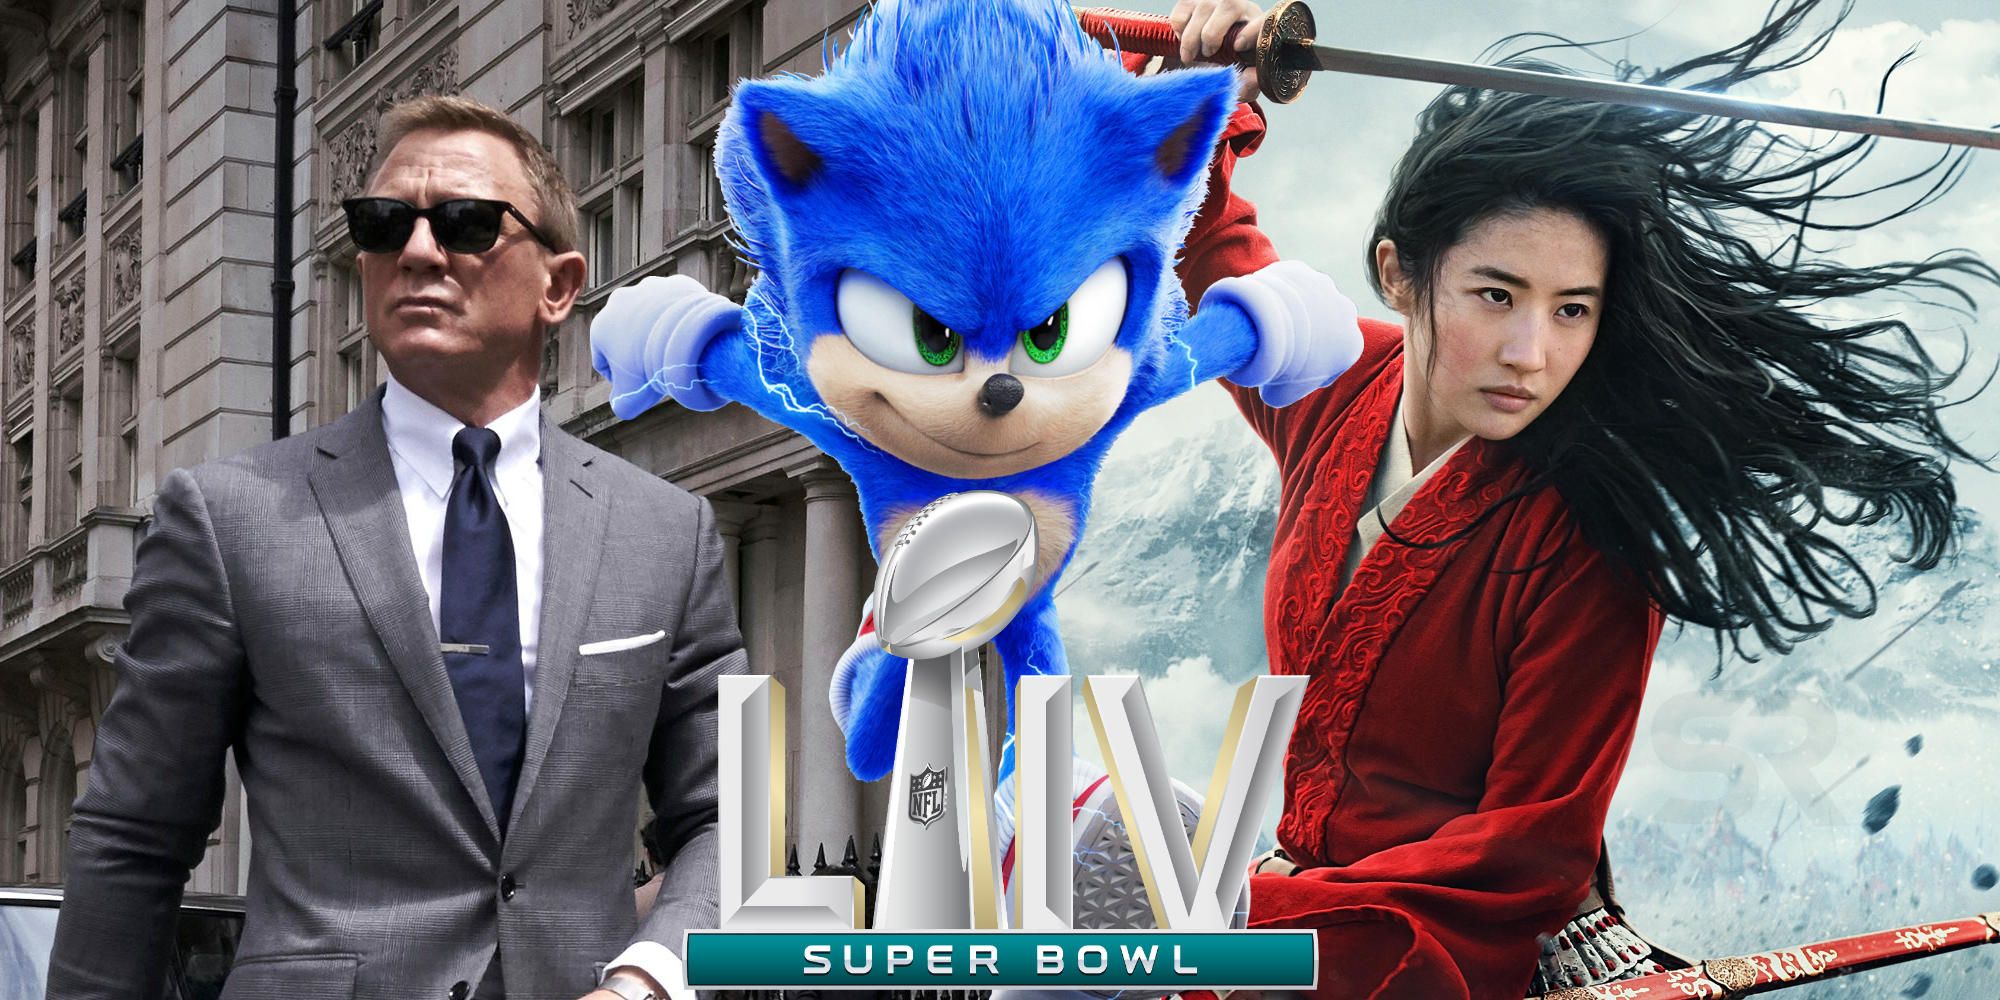 Super Bowl 2020 Movie & TV Trailers Prediction: What To Expect